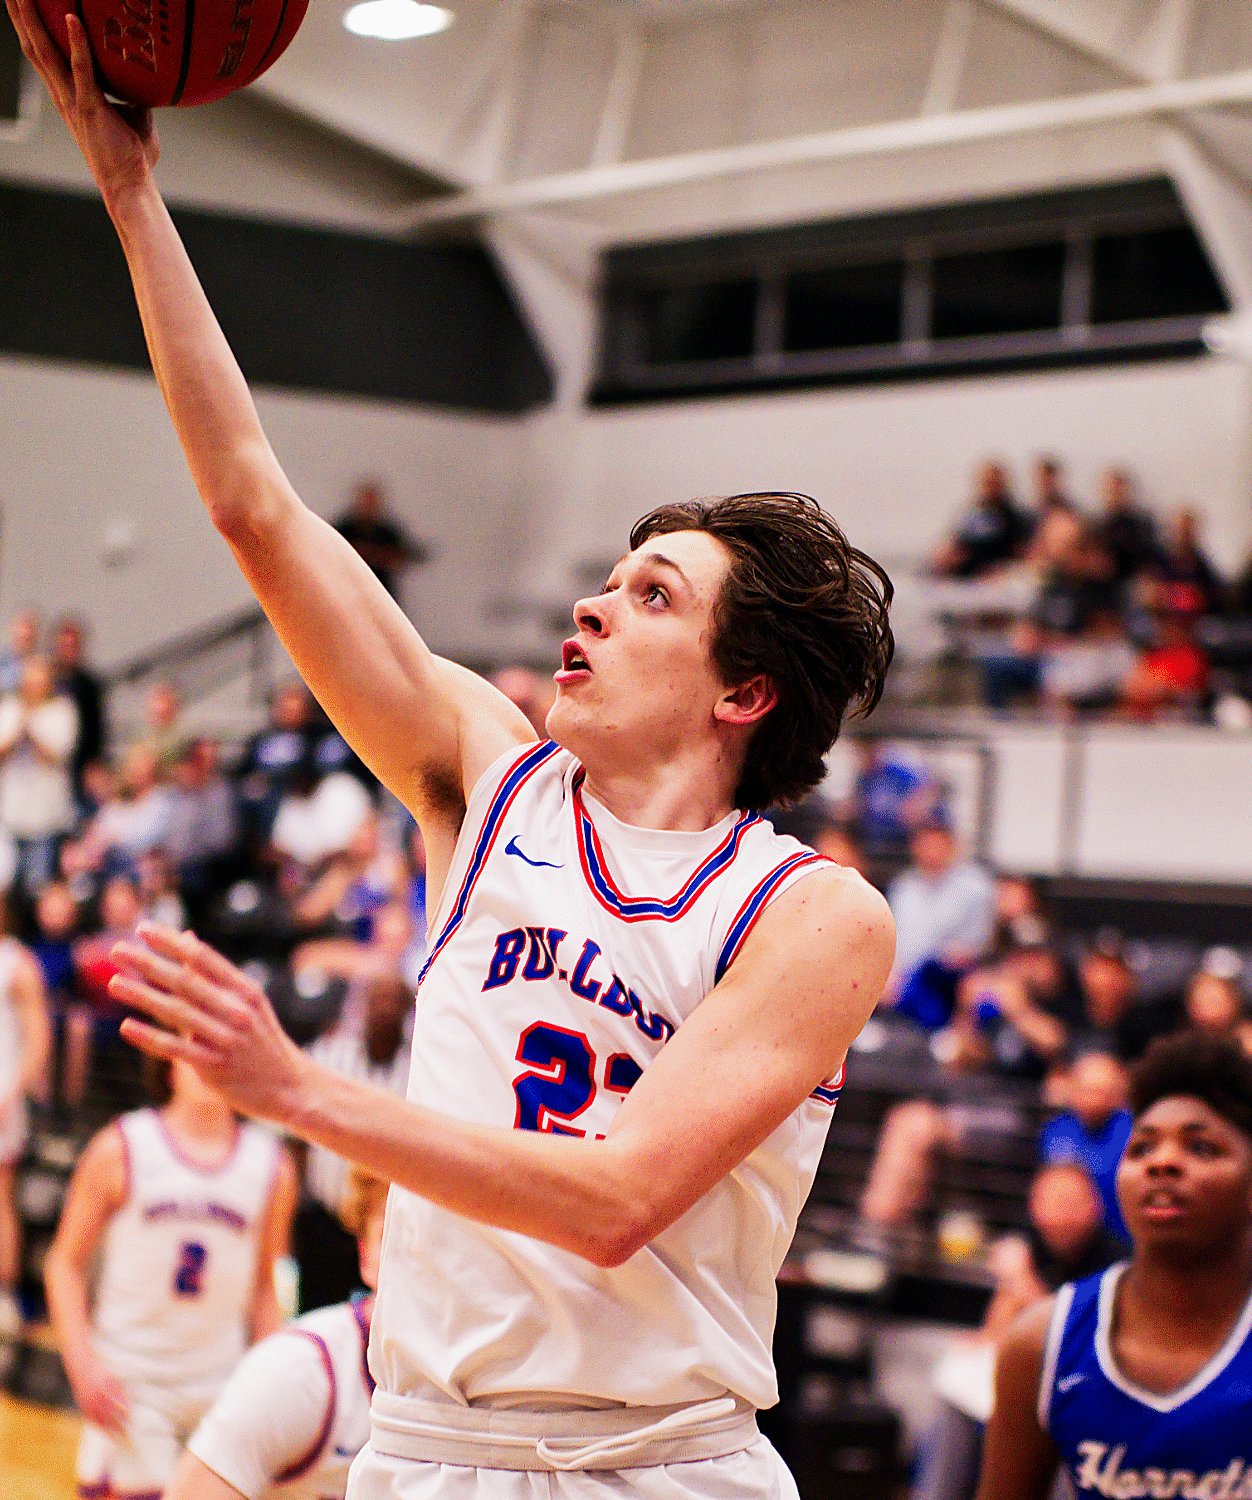 Levi Thompson gets the Bulldogs off to a quick start in the first quarter. [see more shots, buy basketball photos]